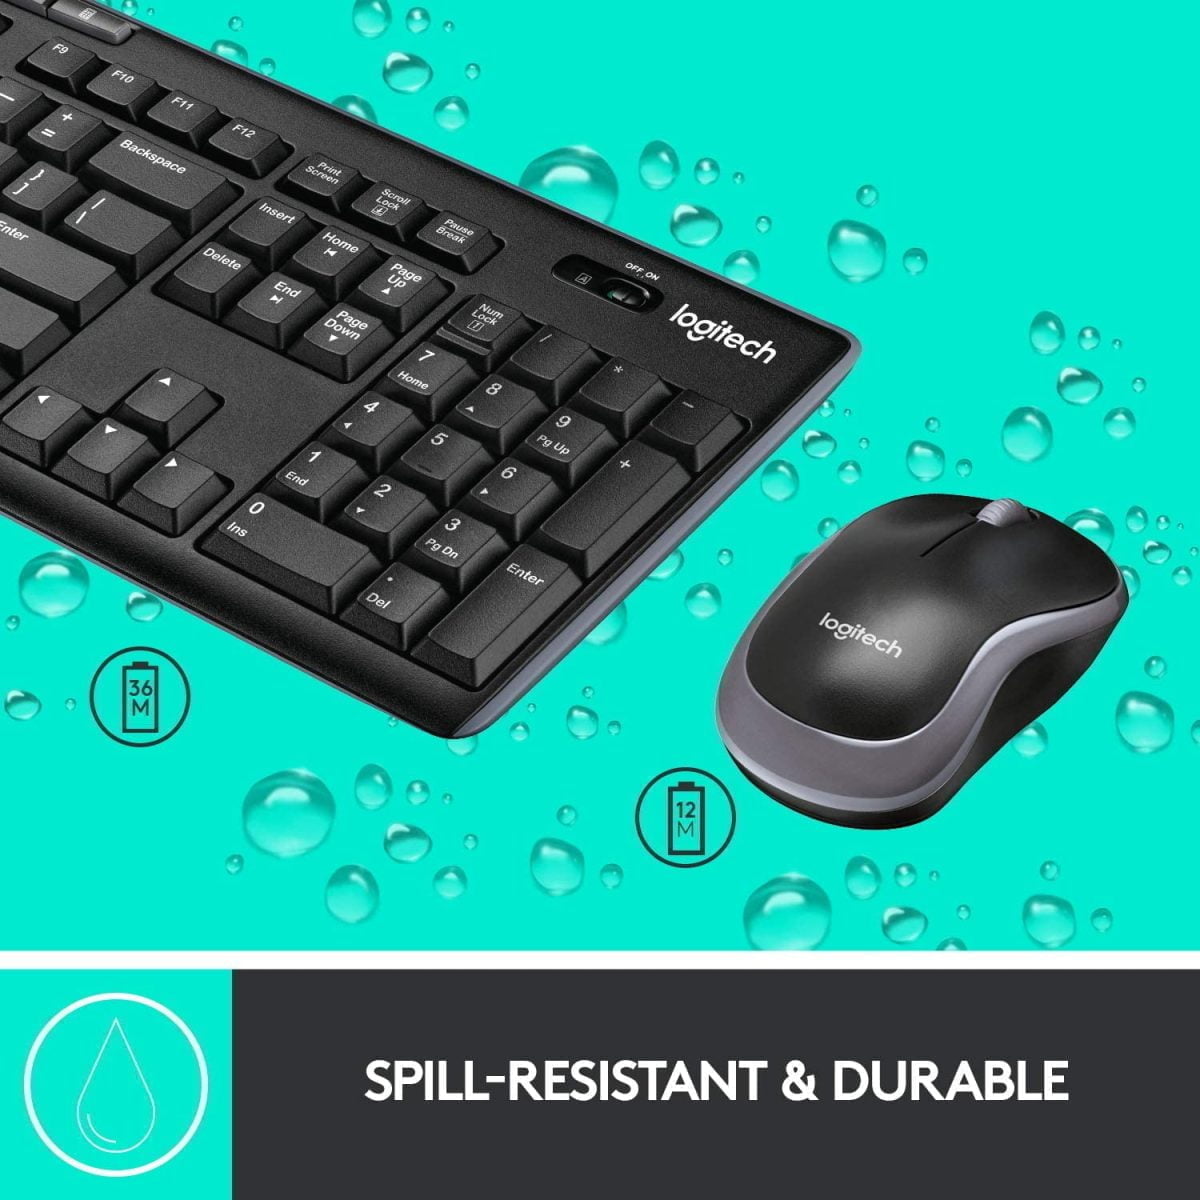 71Loz Mlb0L. Ac Sl1500 لوجيتك Https://Www.youtube.com/Watch?V=Hhwya1Rlfts 4 Ghz Wireless Connection: A Tiny Logitech Unifying Receiver Connects Both The Keyboard And Mouse Using Just One Usb Port
Long Battery Life: Get Up To 24 Months Of Keyboard Power And 12 Months Of Mouse Power Without Changing Batteries (Keyboard And Mouse Battery Life May Vary Based On User And Computing Conditions)
No Software Installation Required لوجيتك – كومبو لاسلكي Mk270 مع لوحة مفاتيح وماوس – أسود